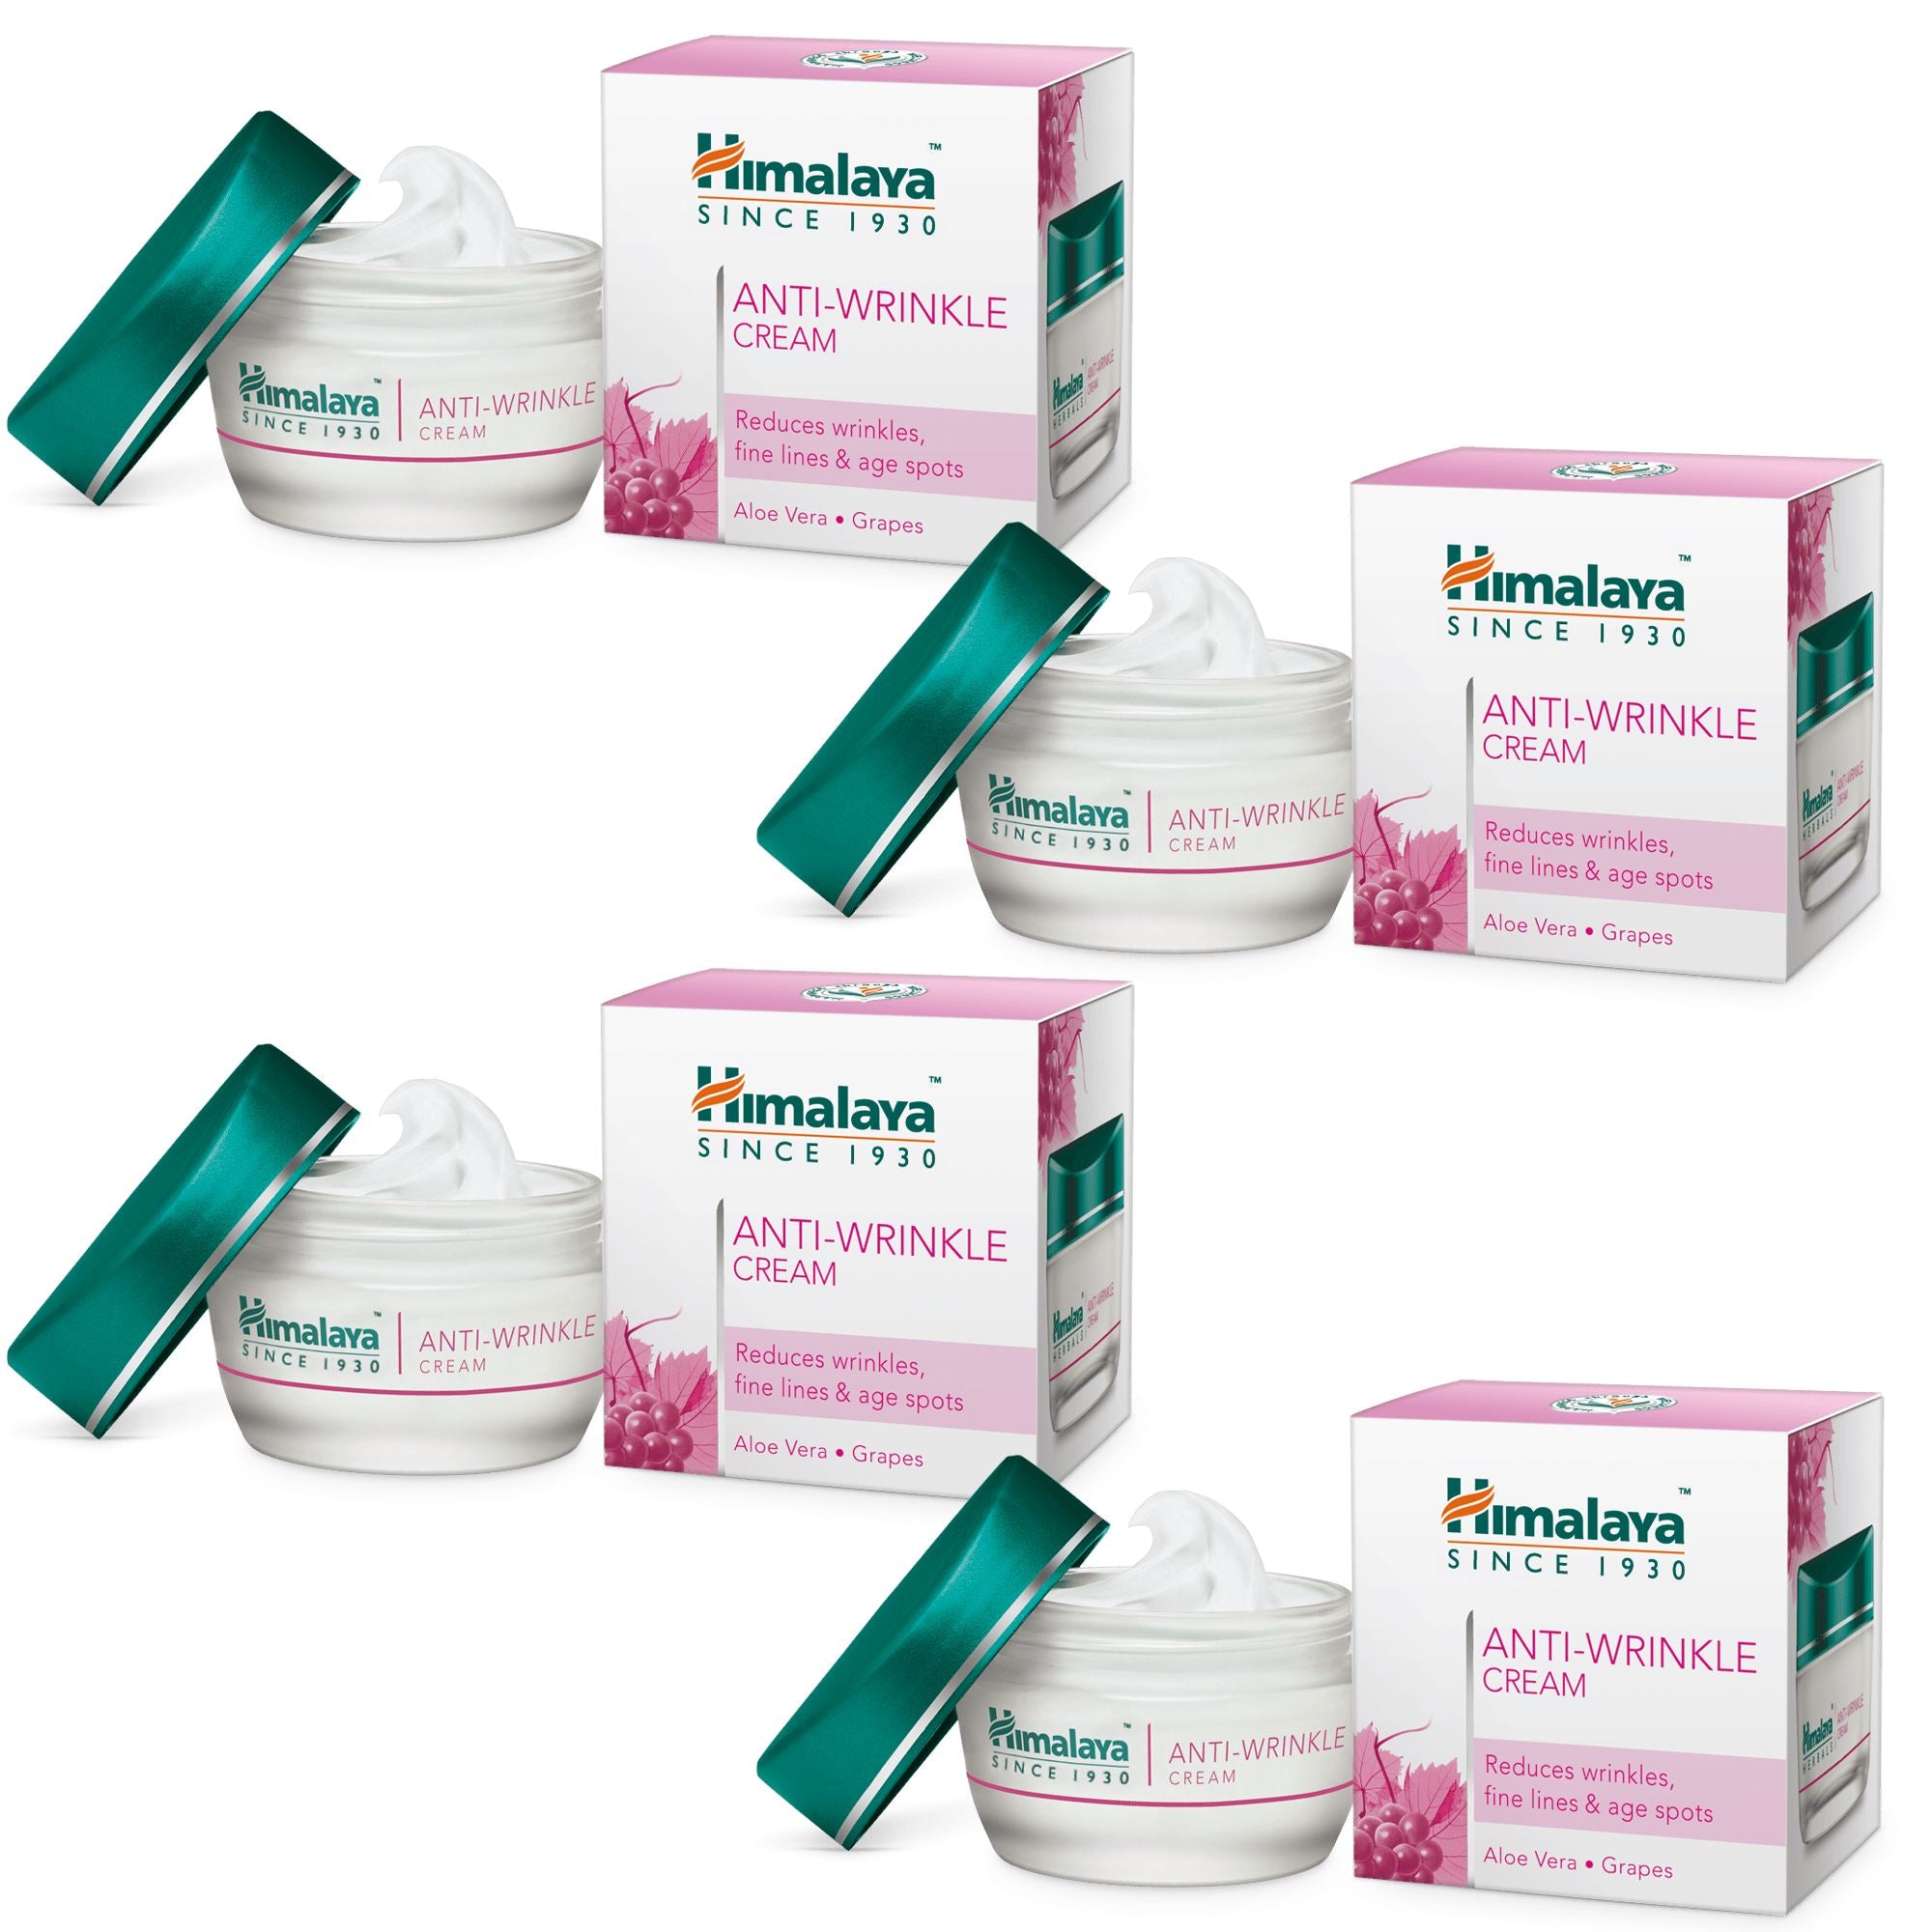 Himalaya Anti-Wrinkle Cream (Pack of 3) - Reduces wrinkles, fine lines and skin roughness